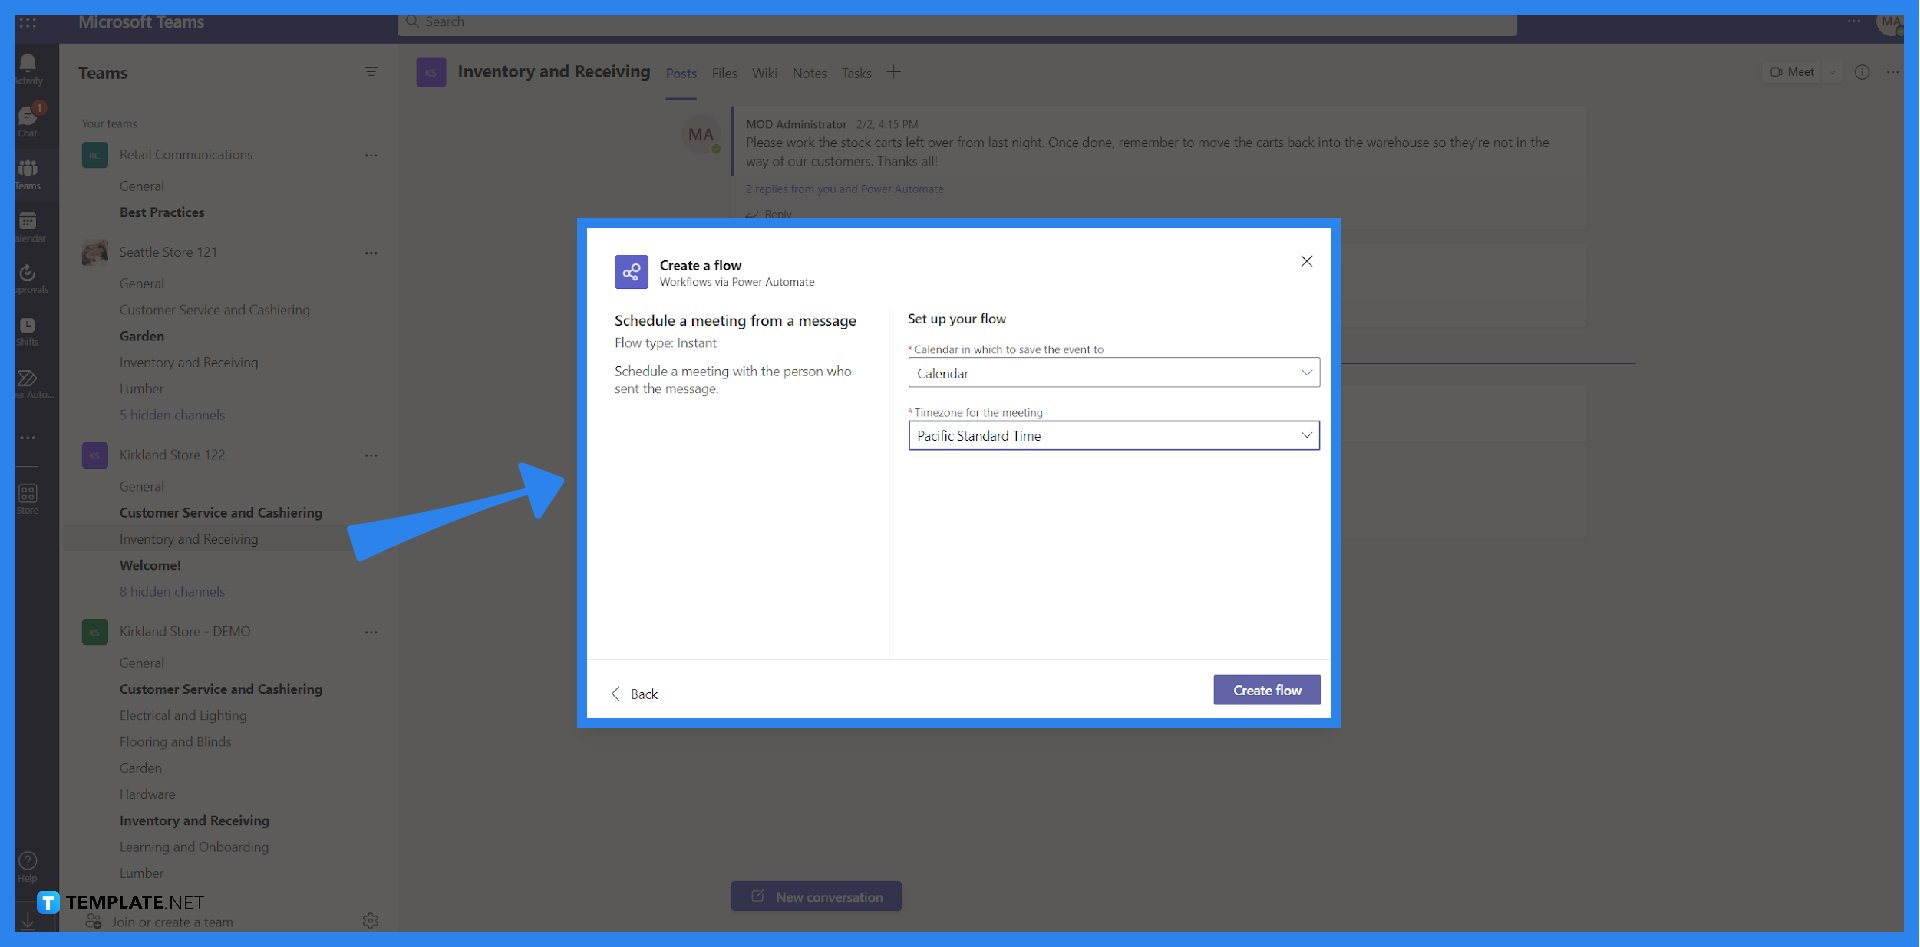 How To Create Flows in Microsoft Teams - Step 3